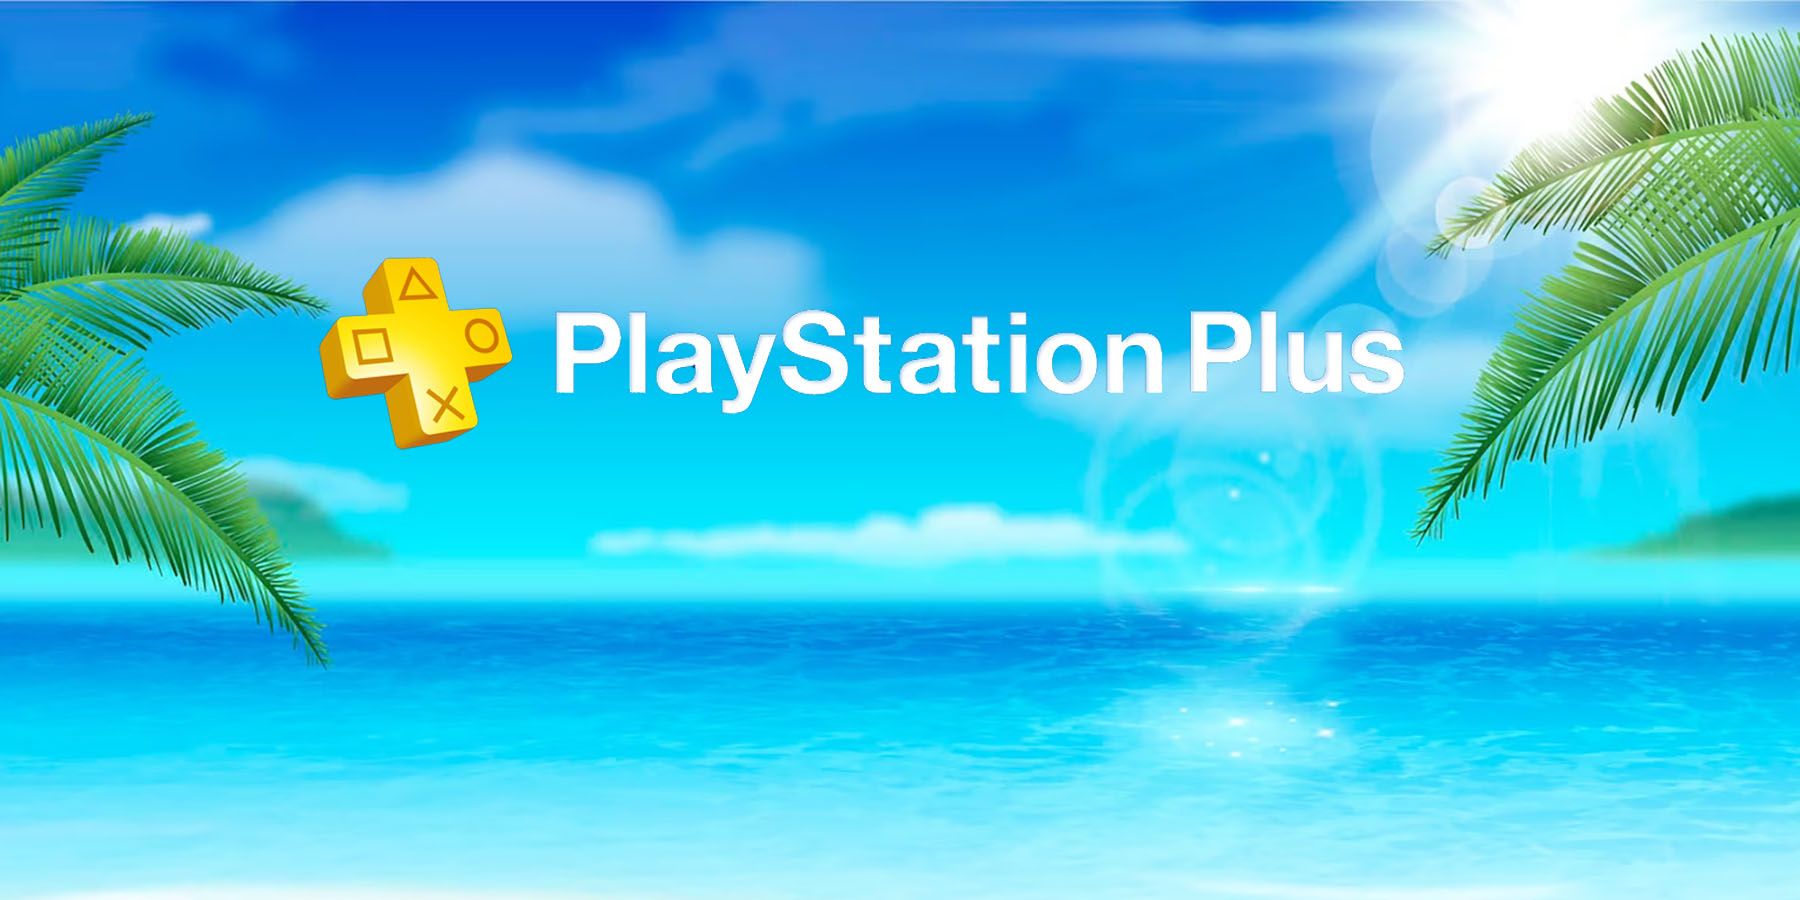 PS Plus June 2023 FREE PS4 and PS5 games: COD Vanguard, Demon's Souls and  more predictions, Gaming, Entertainment